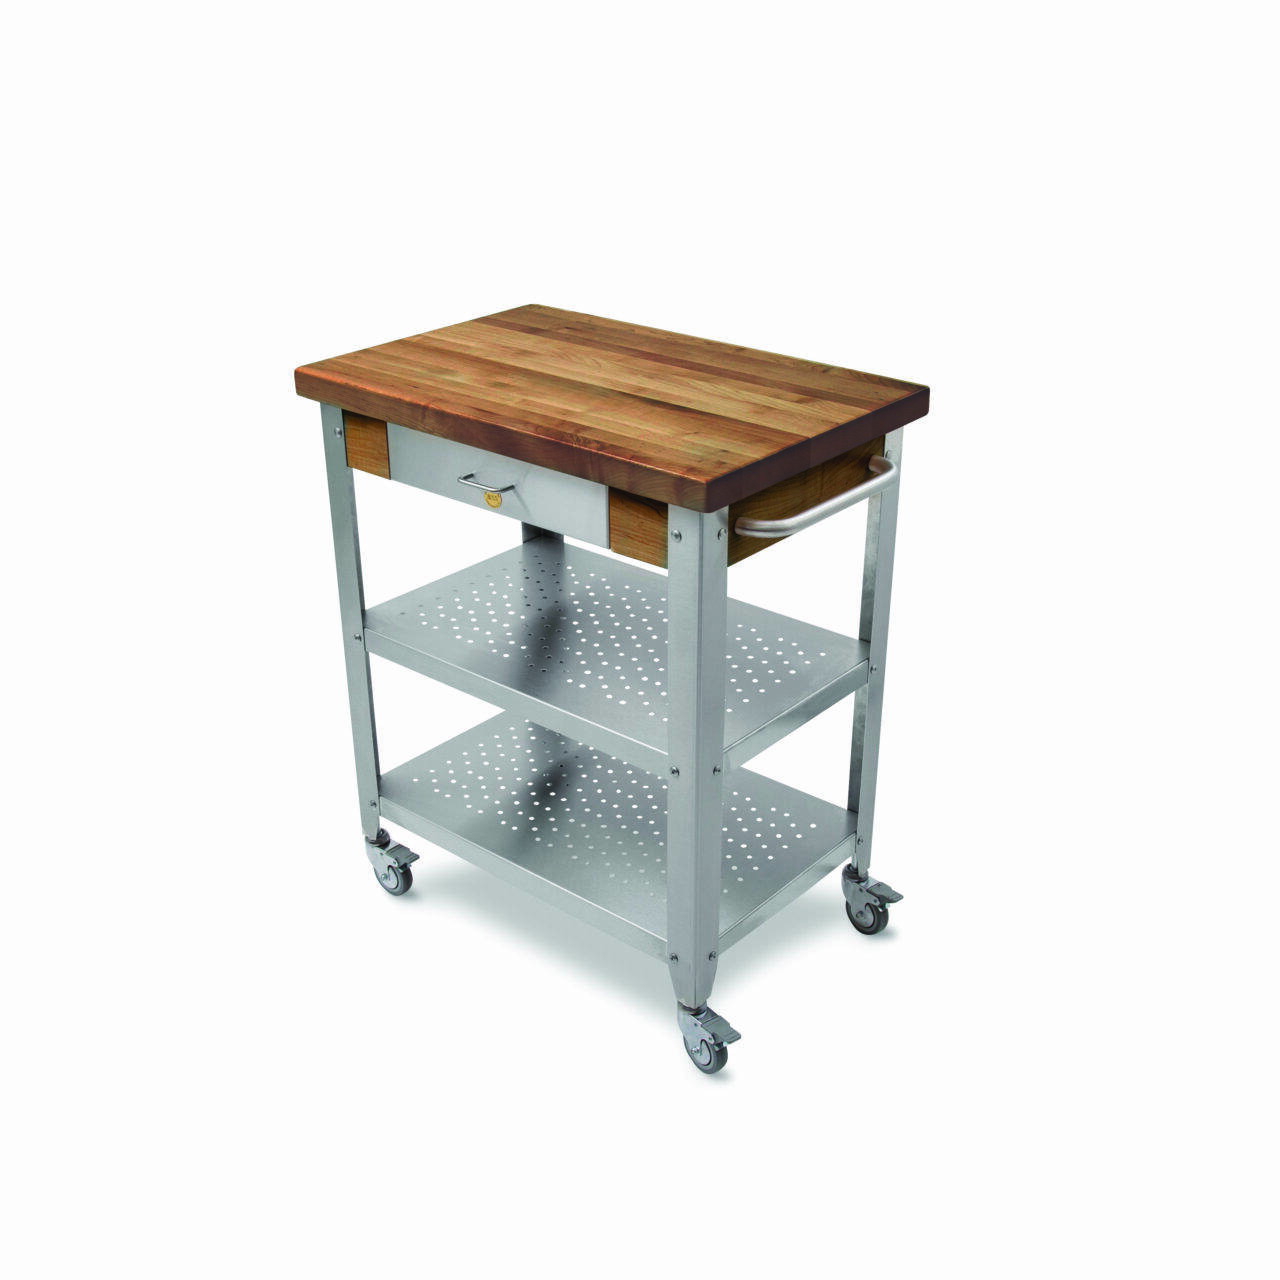 Cucina Kitchen &amp; Serving Cart with Black Walnut Long Wood Countertop with Varnique Finish and Stainless Steel Base with Drawer and Two Shelves, Towel Rack; Locking Casters 9